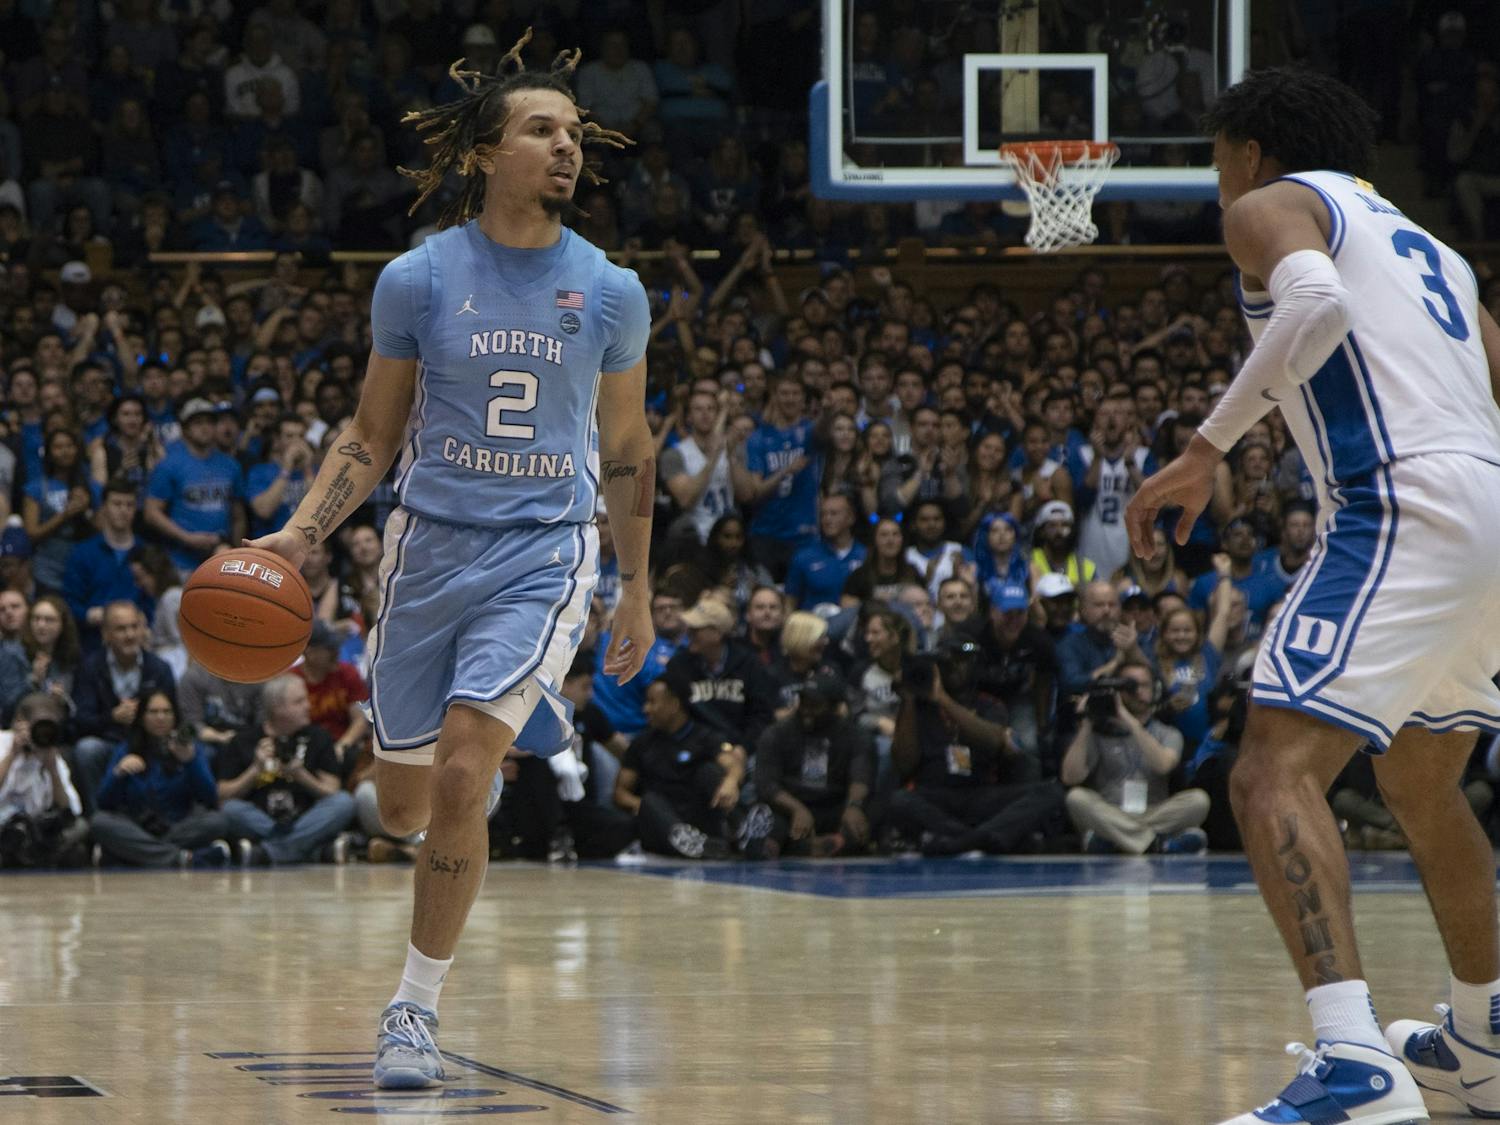 UNC first-year guard Cole Anthony (2) dribbles upcourt in the game against Duke in Cameron Indoor Stadium on Saturday, March 7, 2020. UNC lost to Duke 89-76.